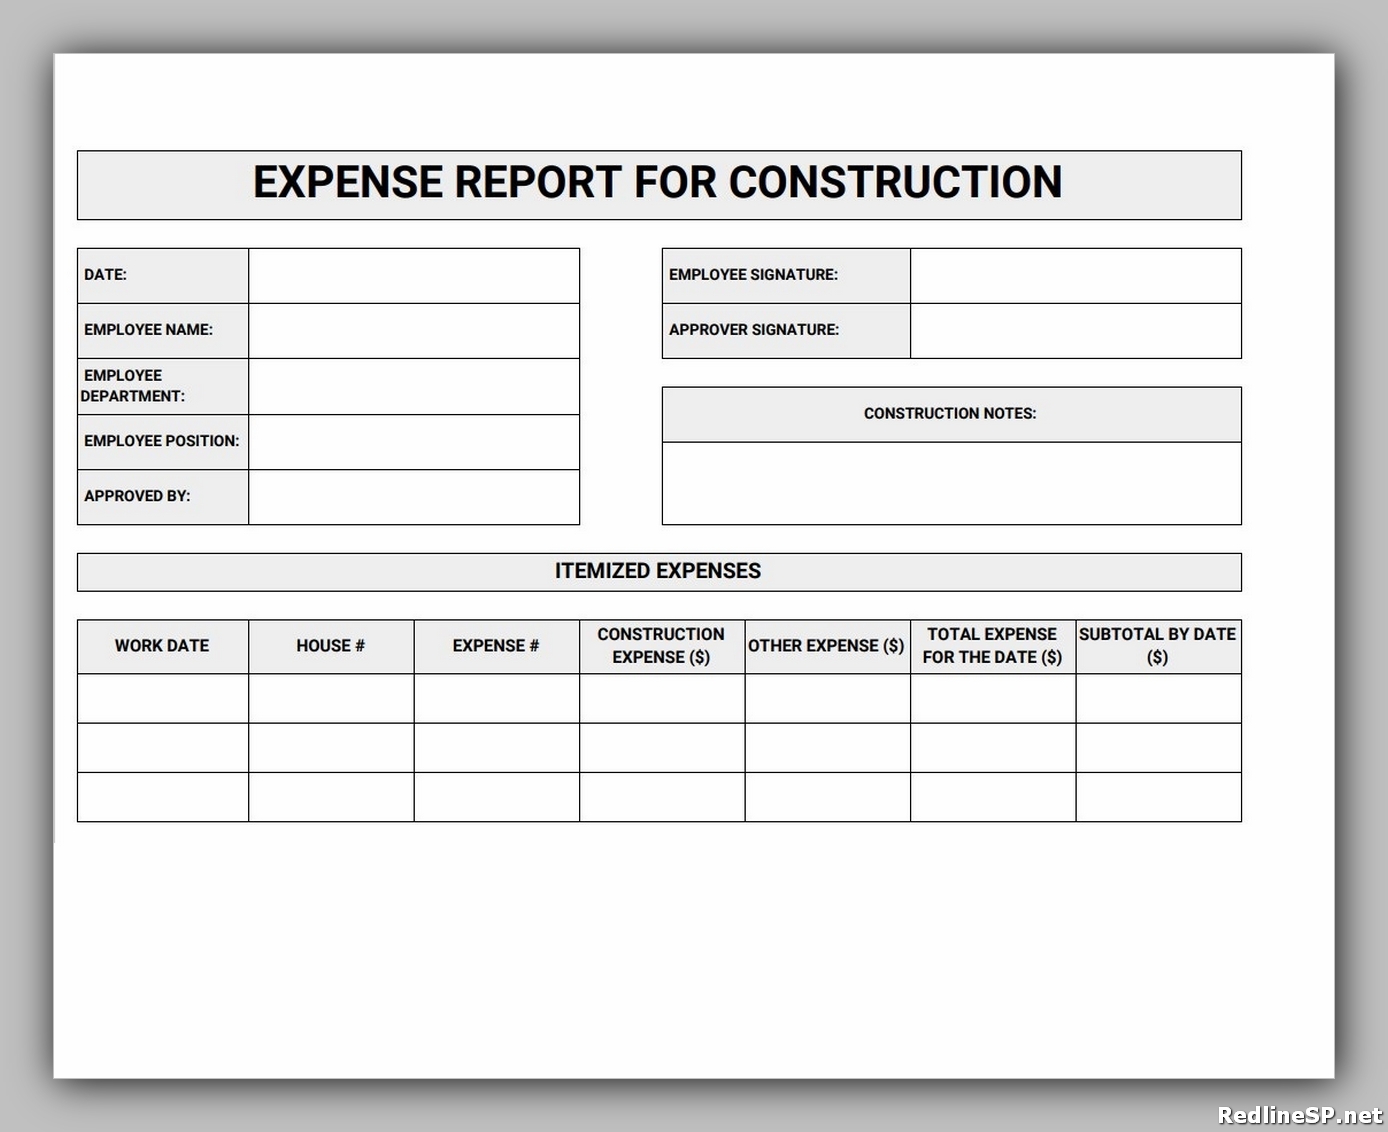 contractor expenses guide